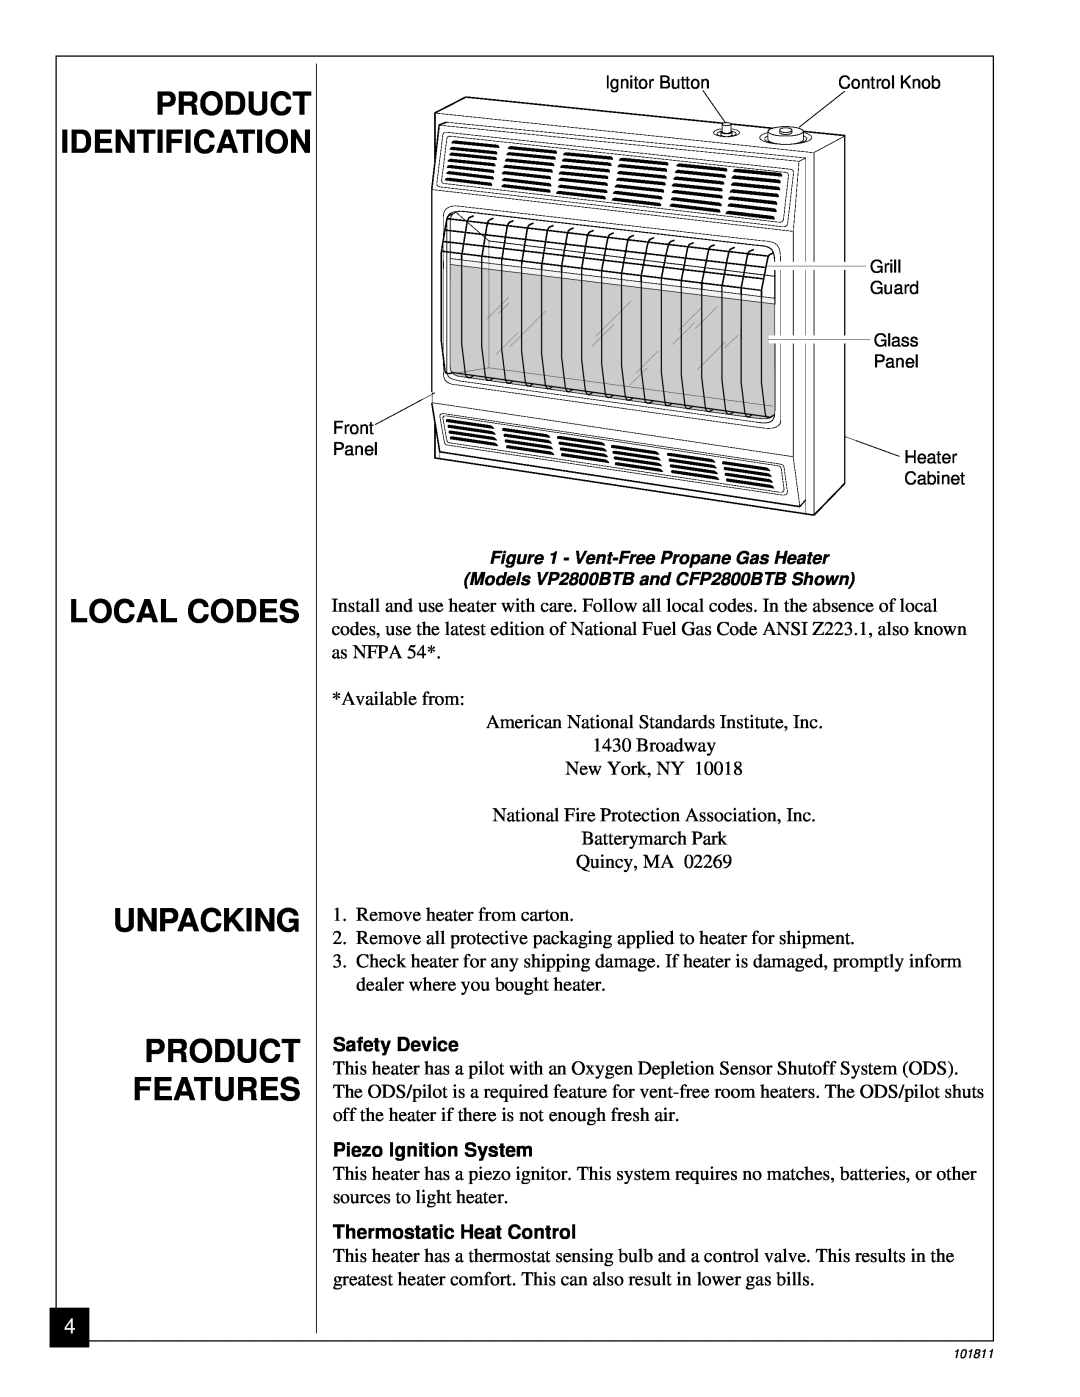 Desa 101811-01C.pdf Product Identification, Local Codes Unpacking Product Features, Safety Device, Piezo Ignition System 